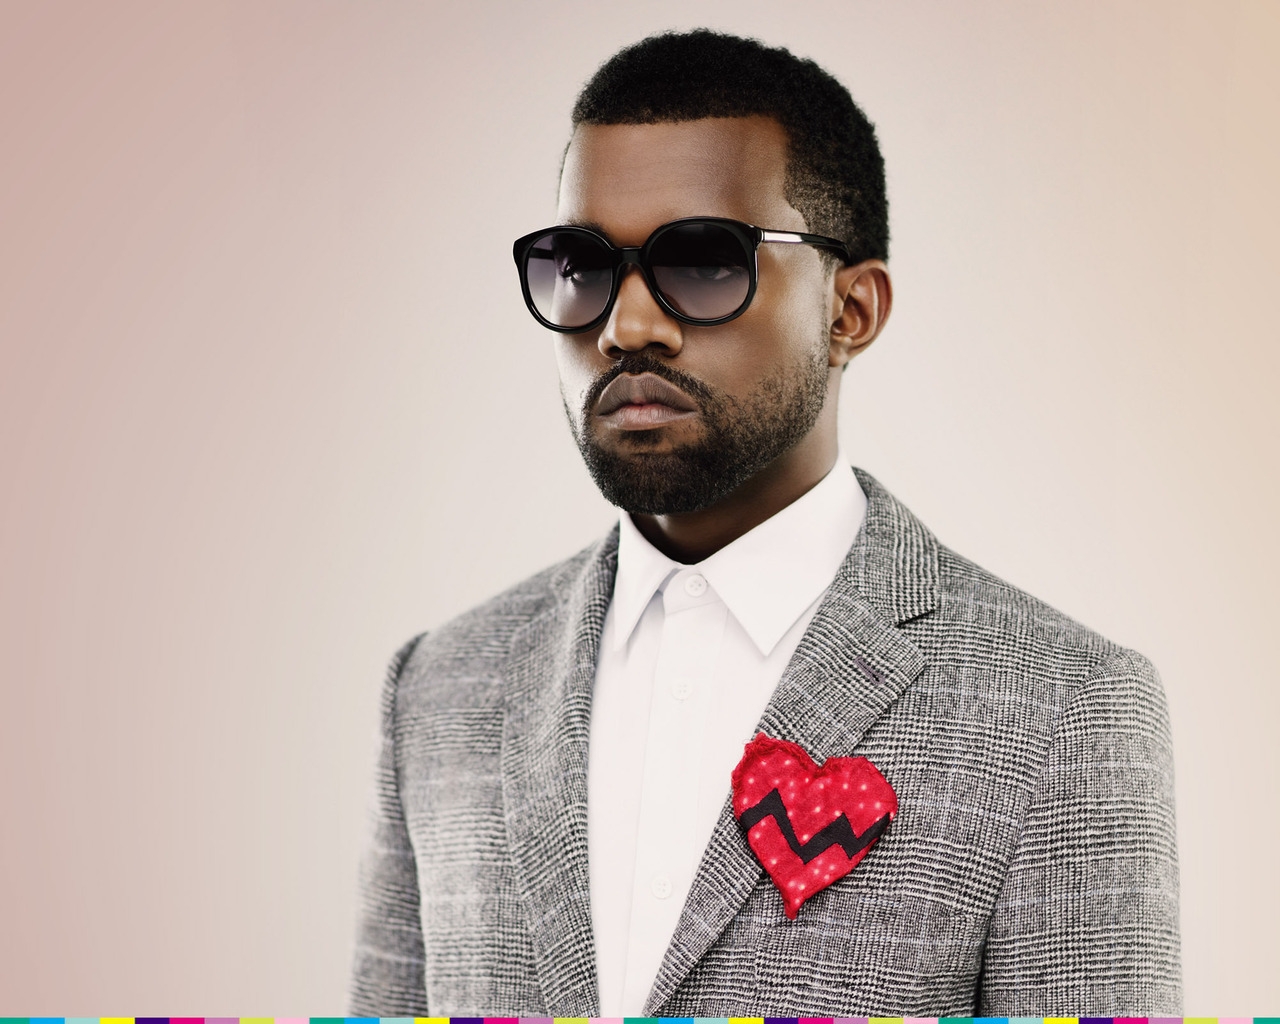 Kanye West for 1280 x 1024 resolution